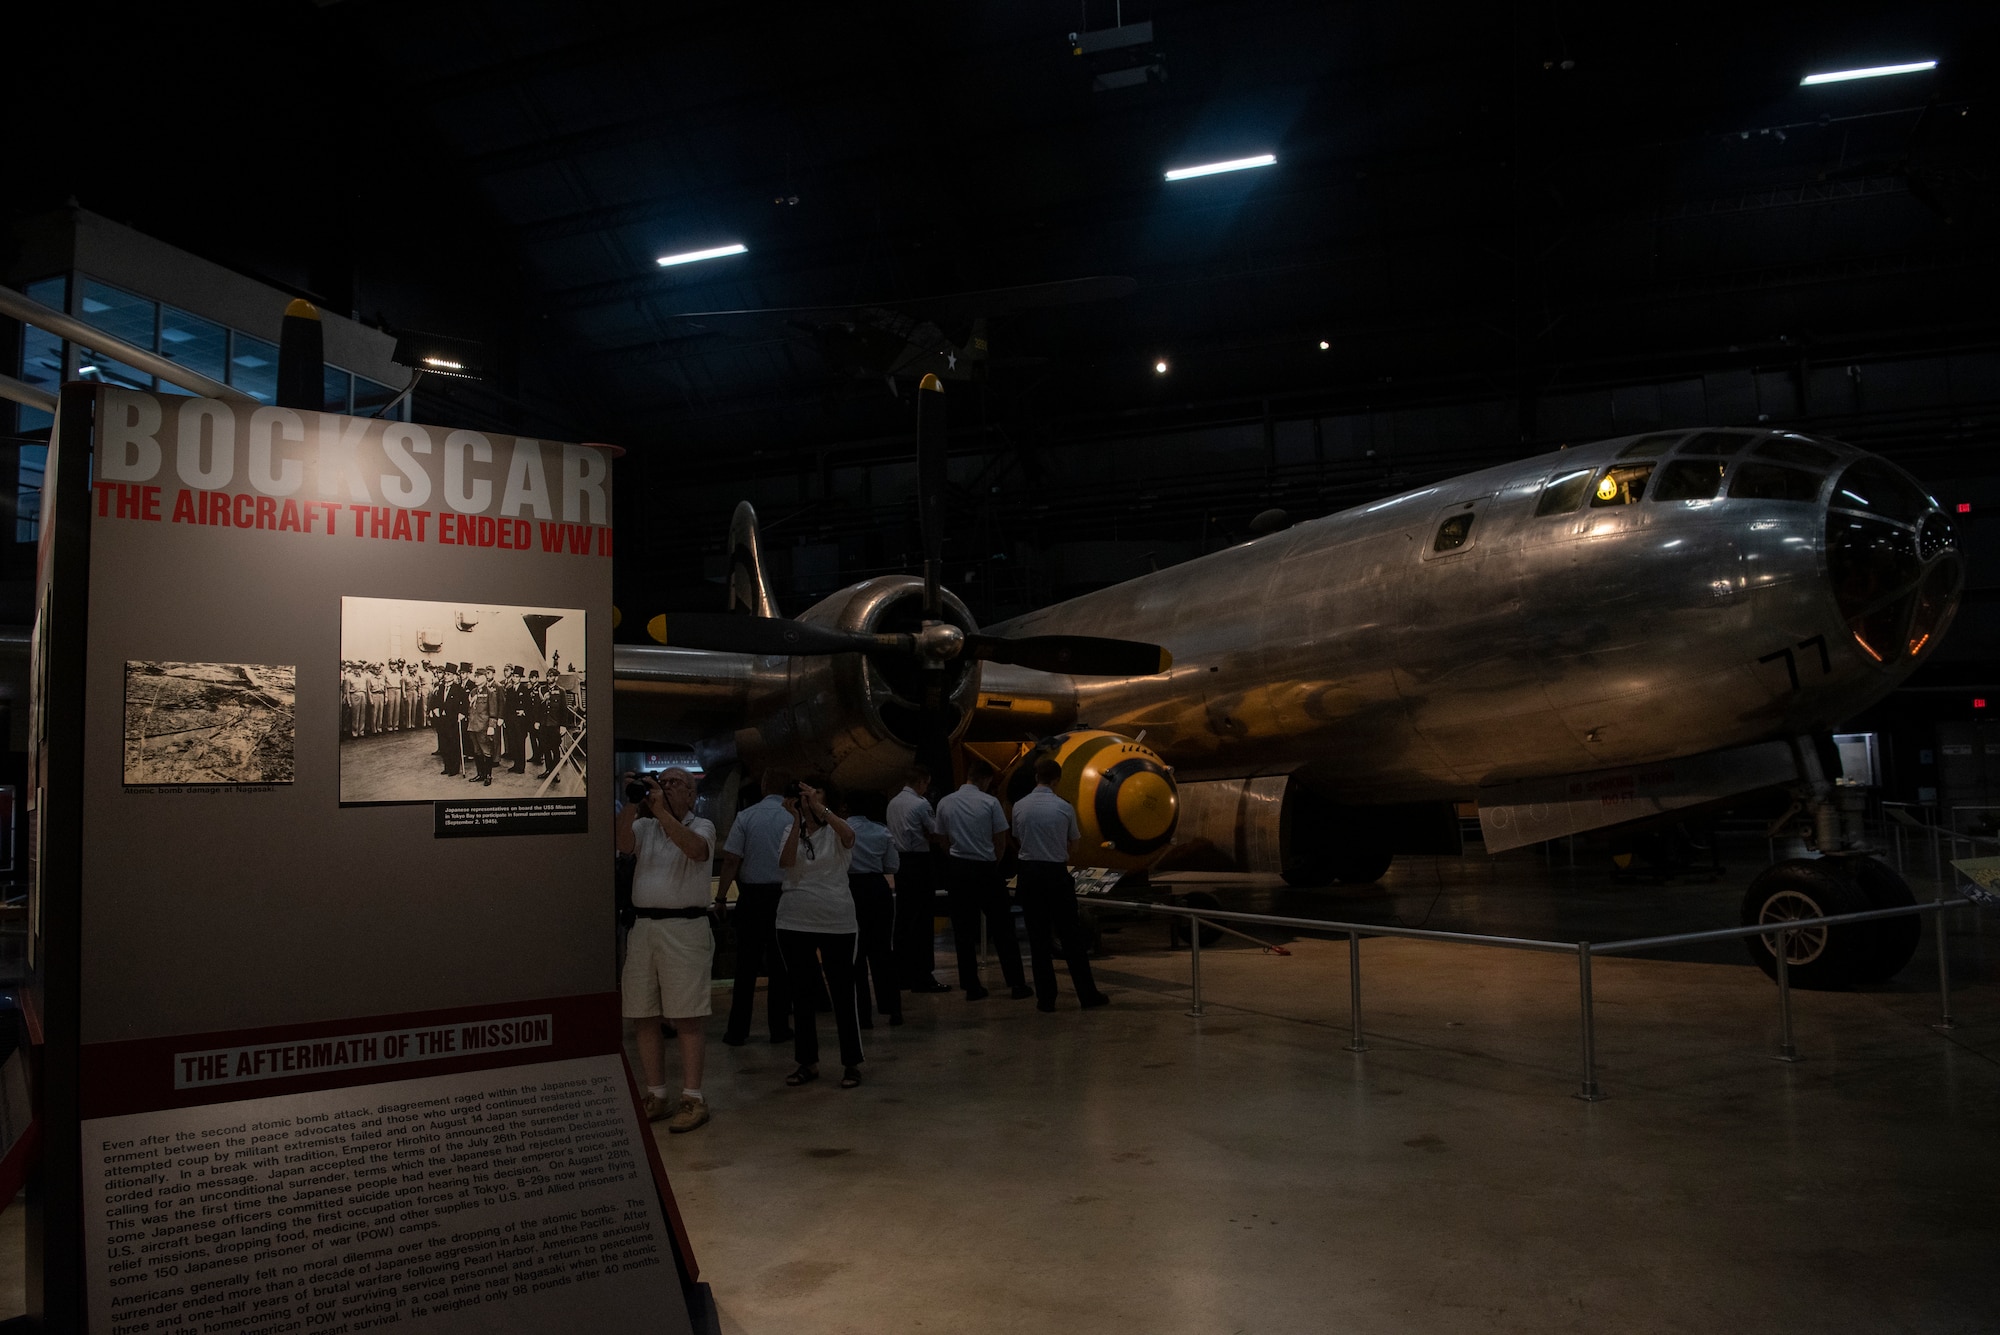 Airmen from the 90th Missile Wing views the B-29 Superfortress "Bockscar" exhibit within the National Museum of the U.S. Air Force Sept. 4, 2019, at Wright-Patterson Air Force Base, Ohio. Bockscar was the plane that dropped the atomic bomb on Nagasaki. (U.S. Air Force photo by Senior Airman Abbigayle Williams)